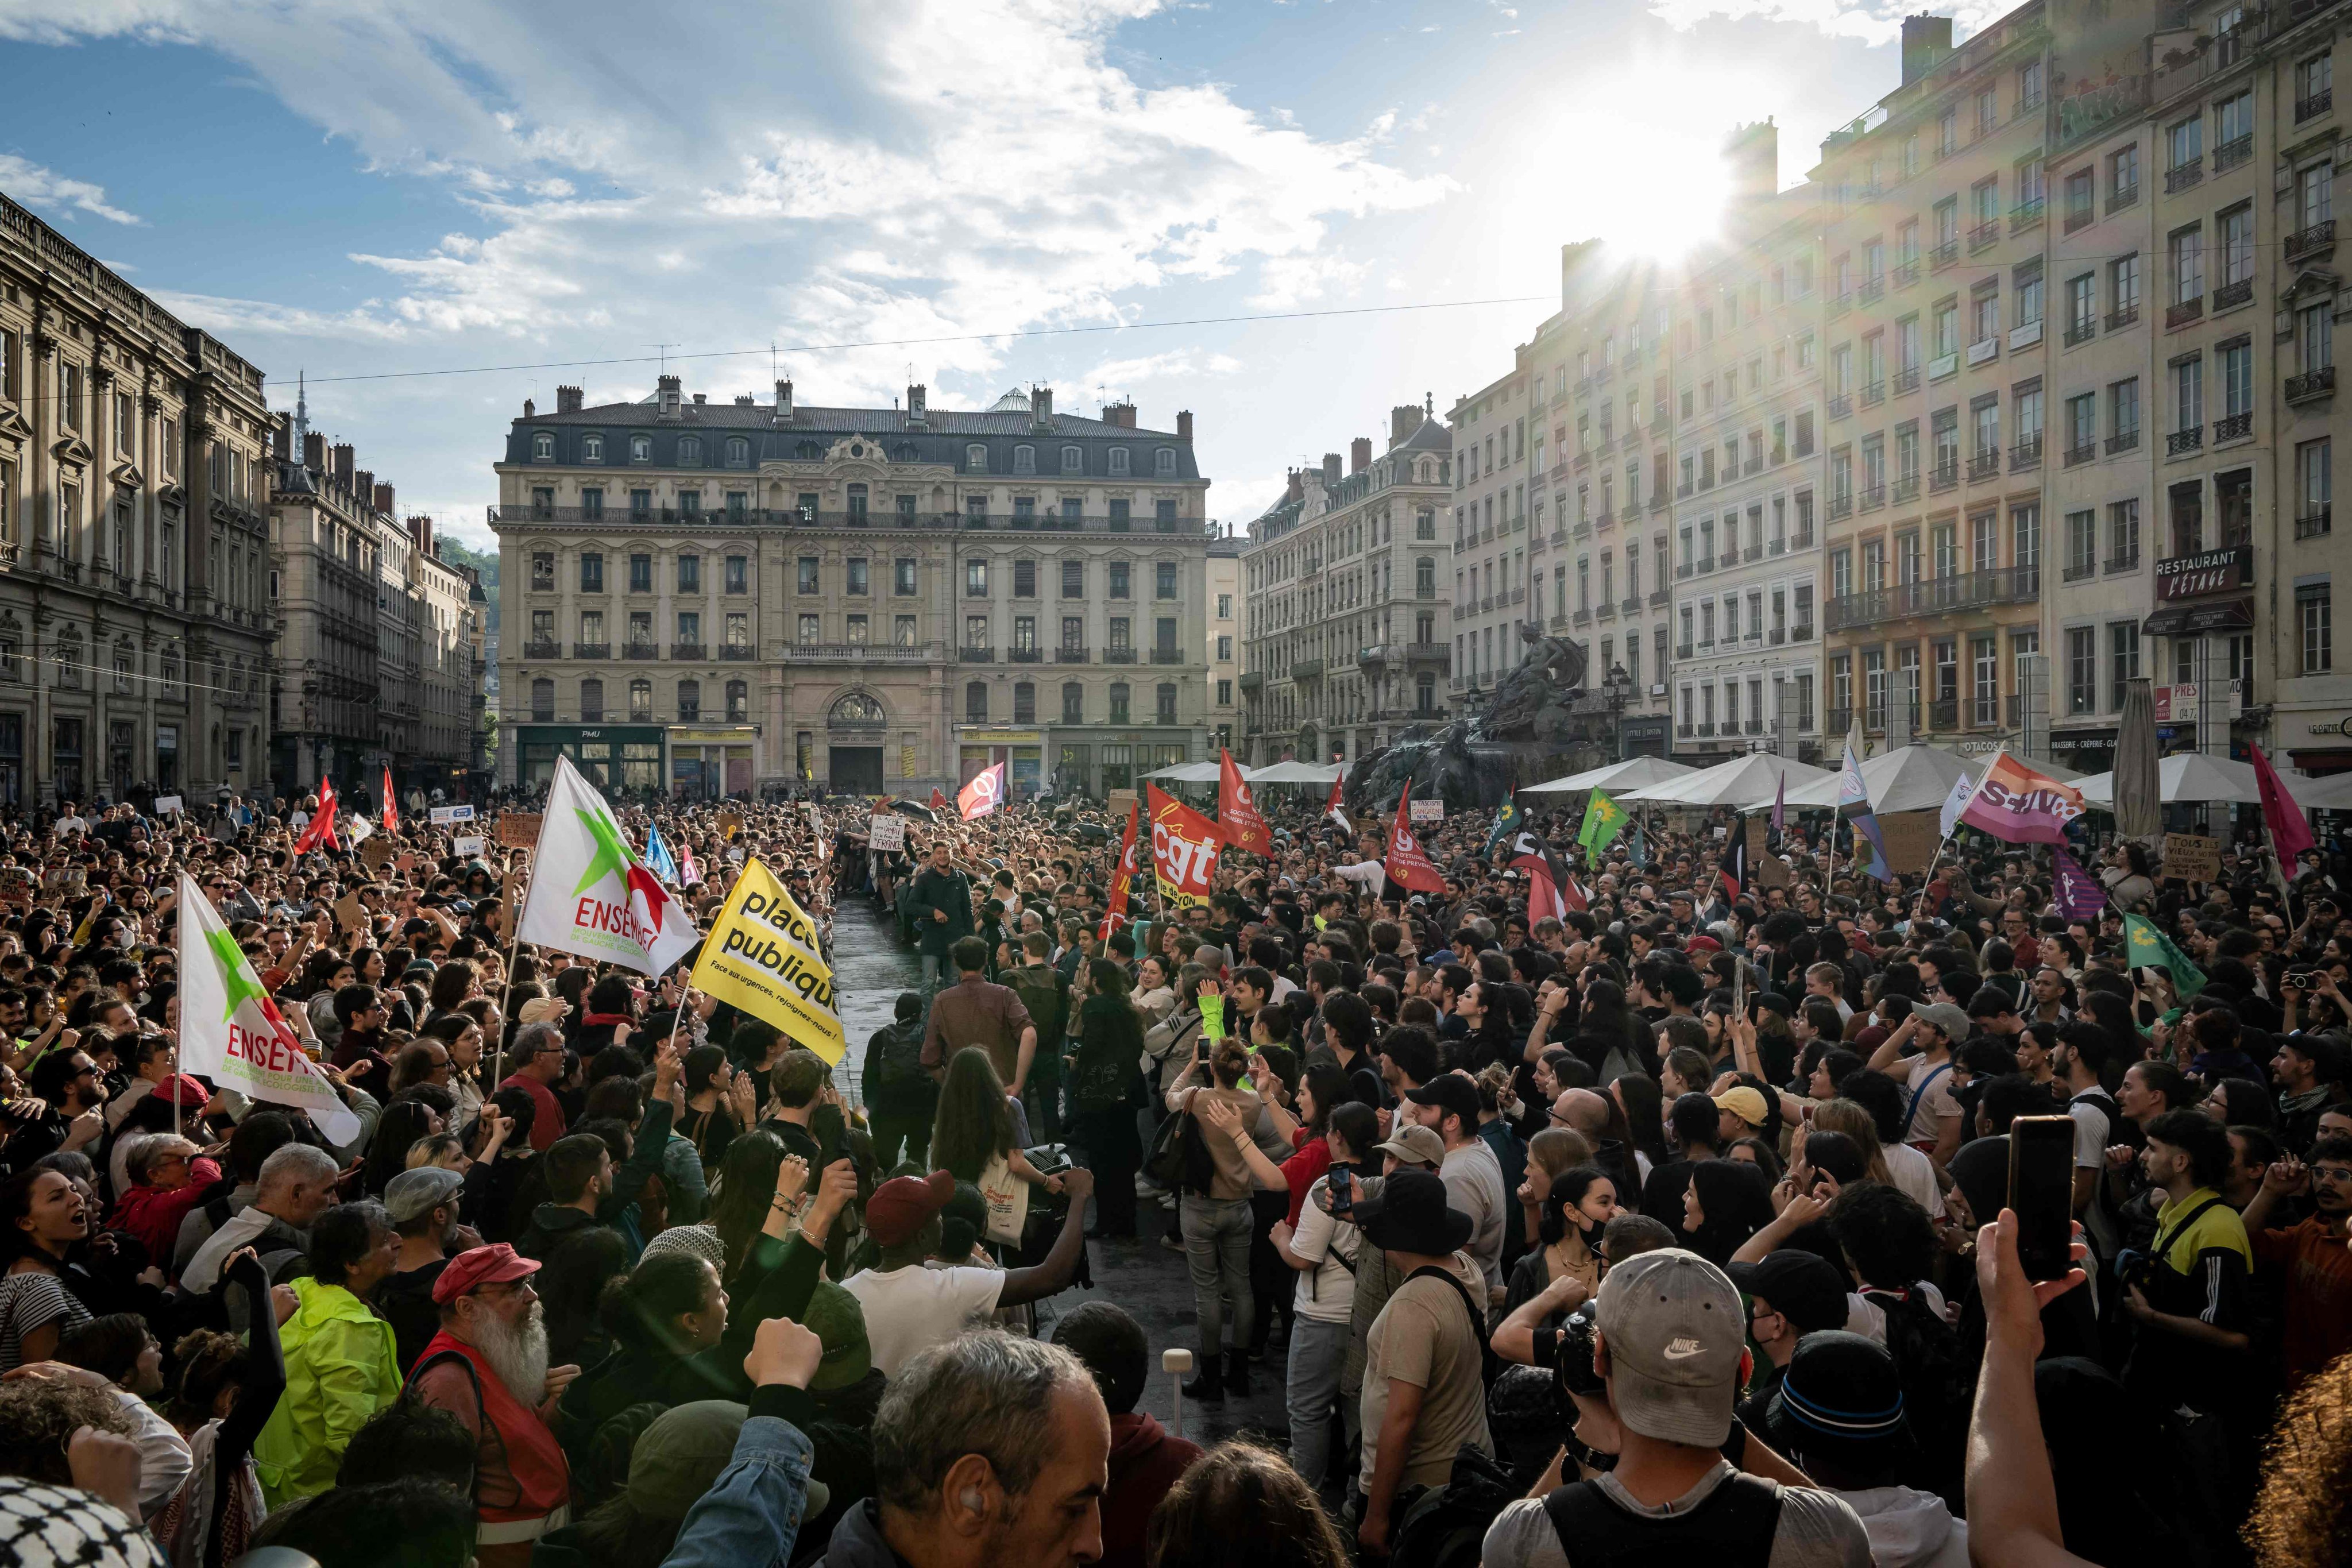 Demonstrators gather in the Terreaux square during an anti-far-right rally in Lyon, France, on June 14. Photo: AFP